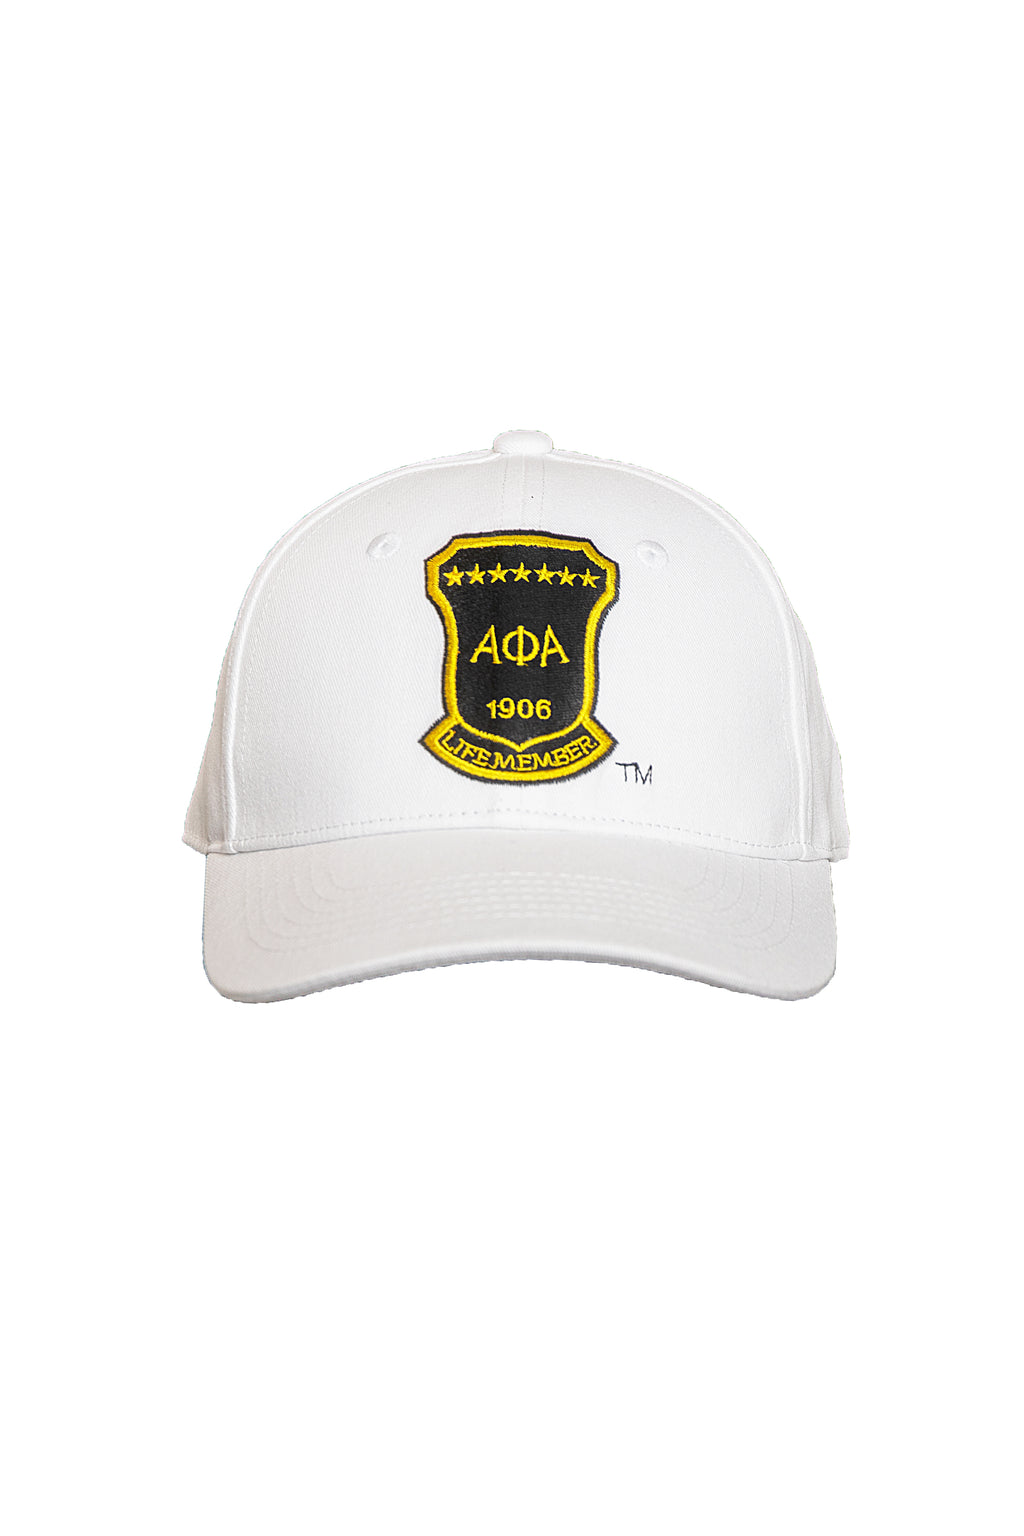 Embroidered Alpha White Life Member Hat